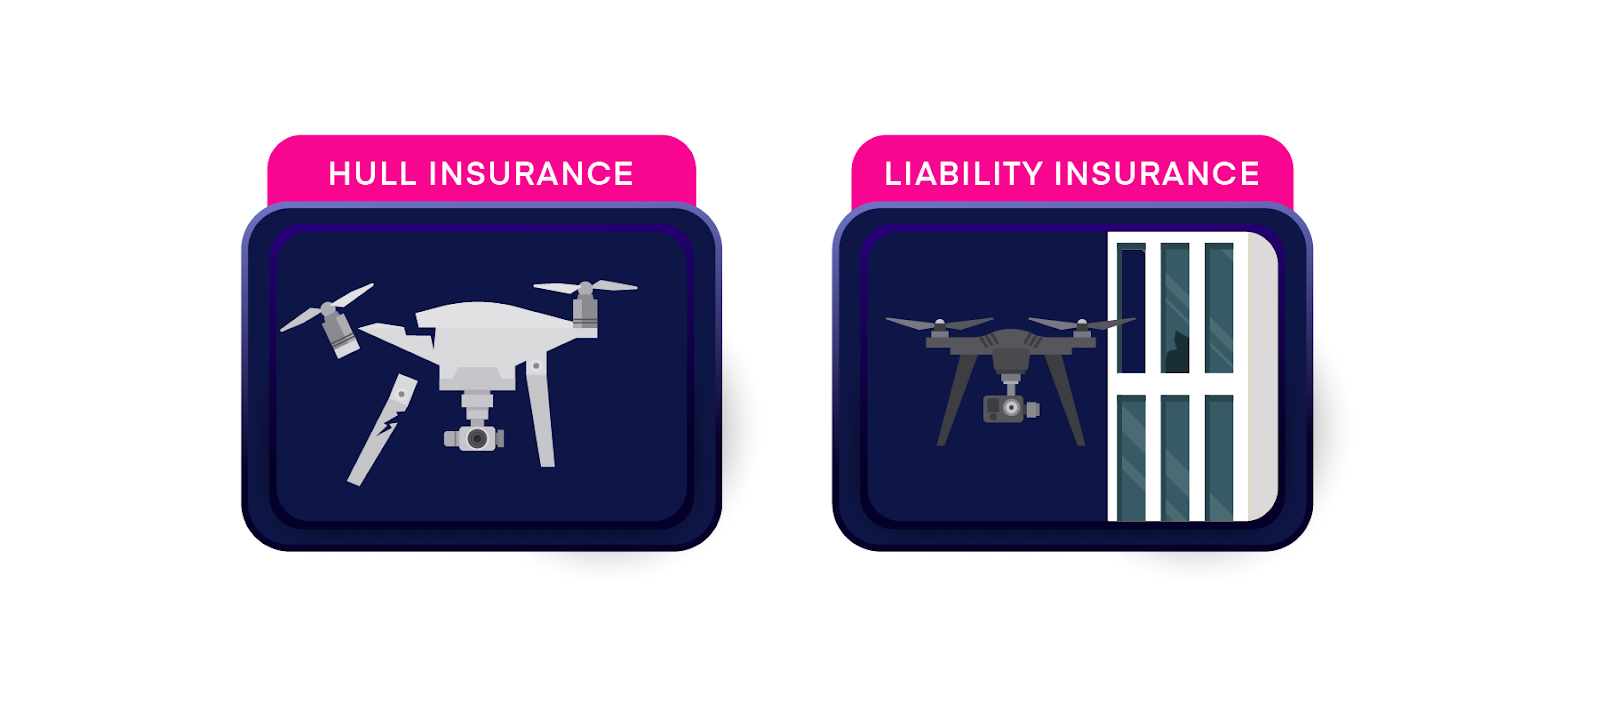 Icons representing hull insurance and liability insurance.